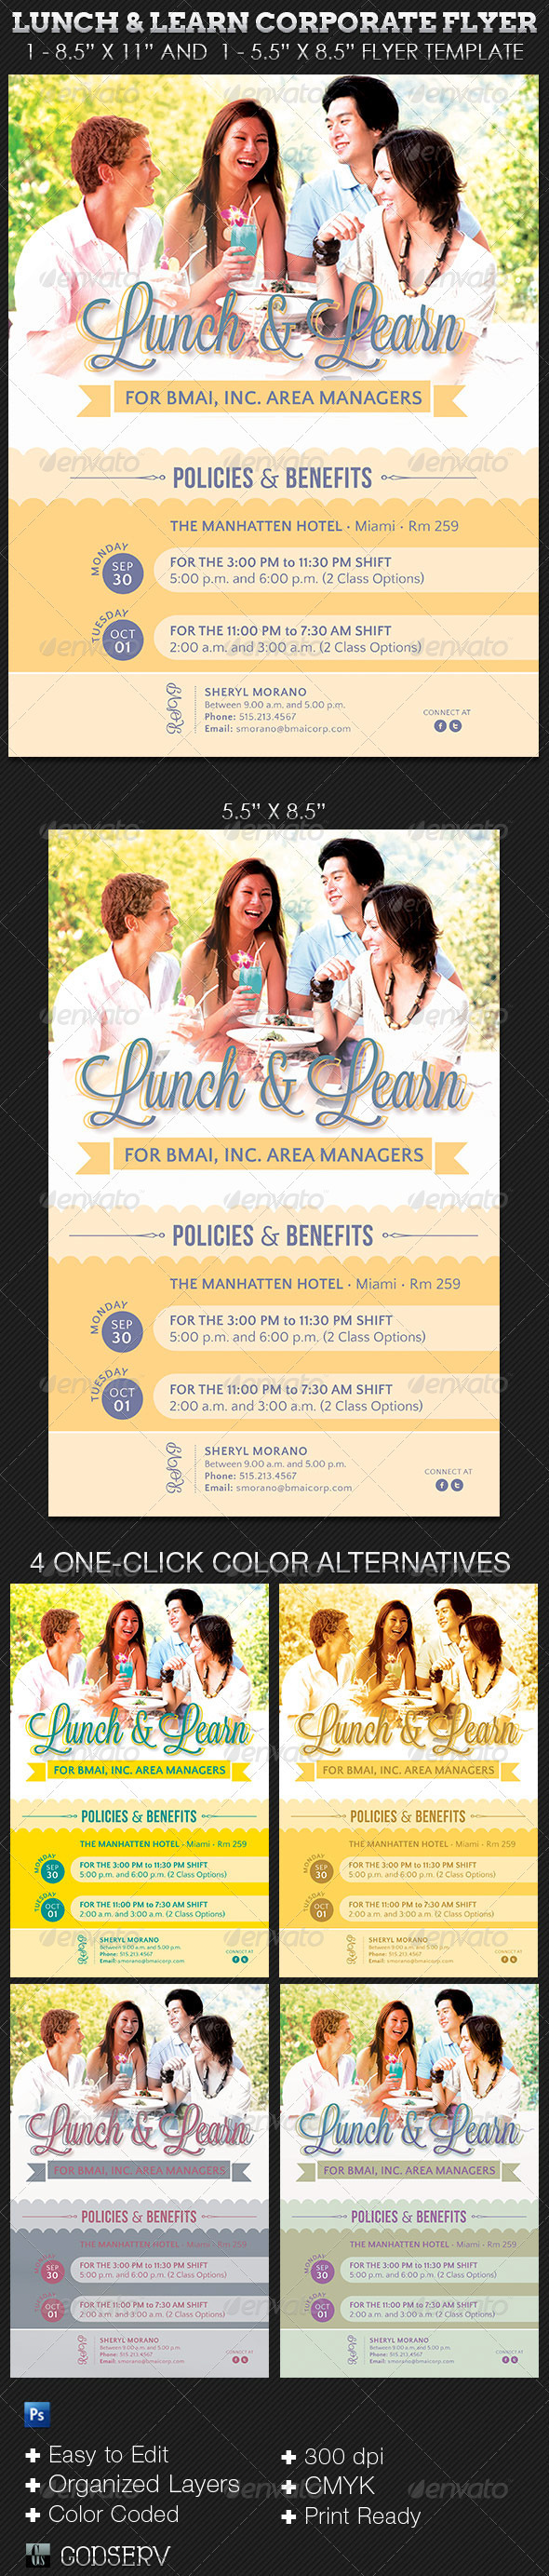 Lunch and Learn Corporate Flyer Template on Behance